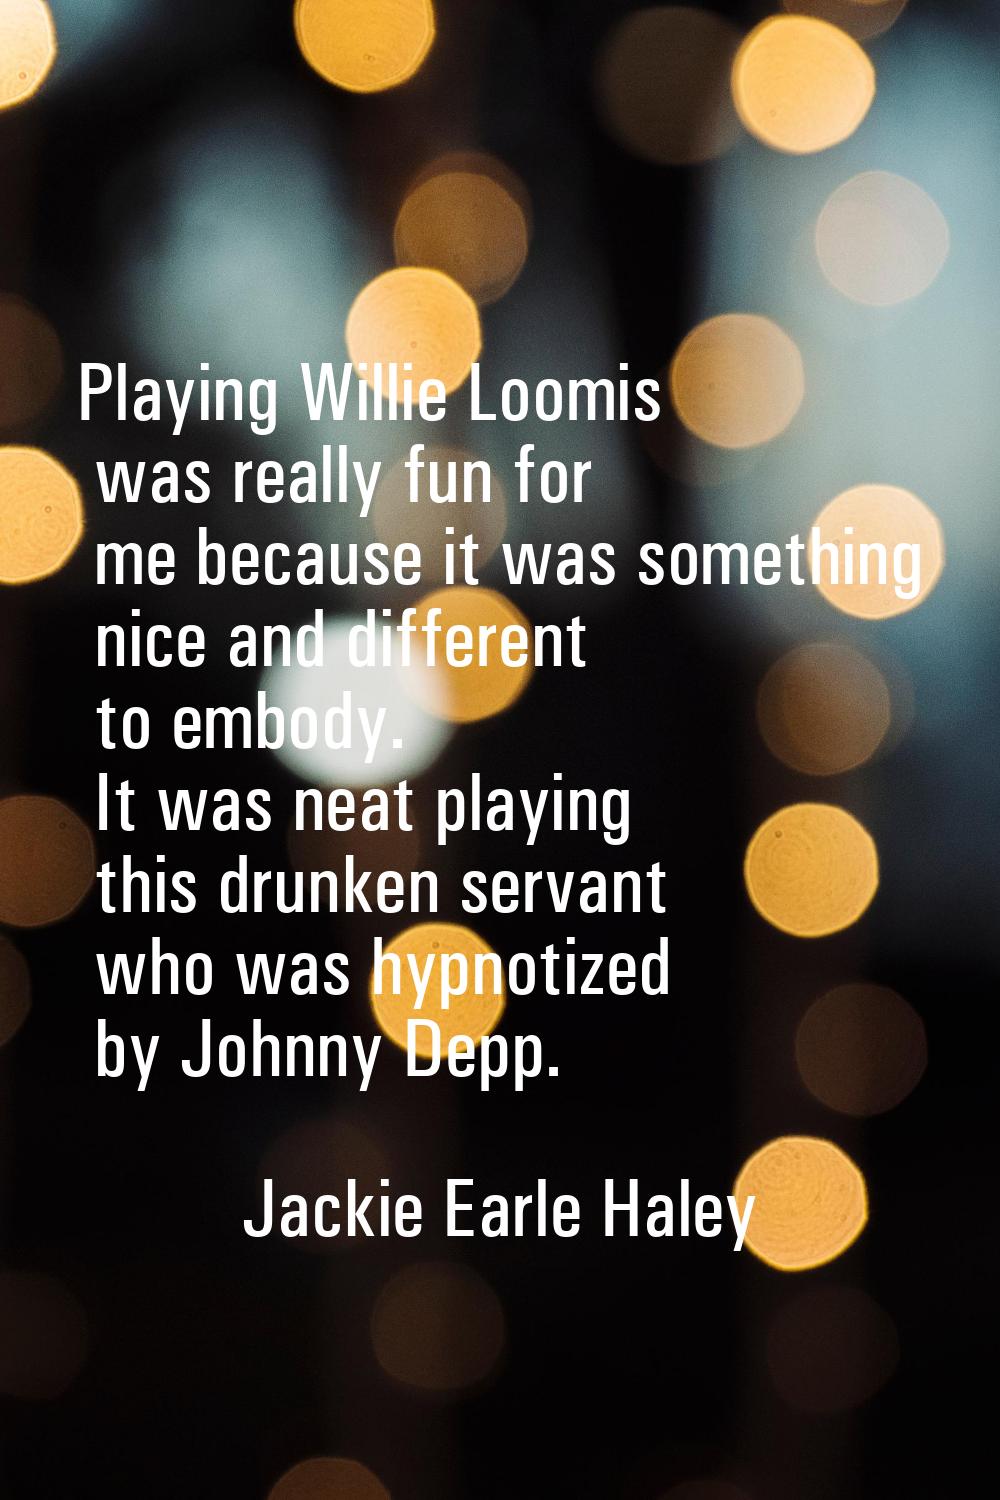 Playing Willie Loomis was really fun for me because it was something nice and different to embody. 